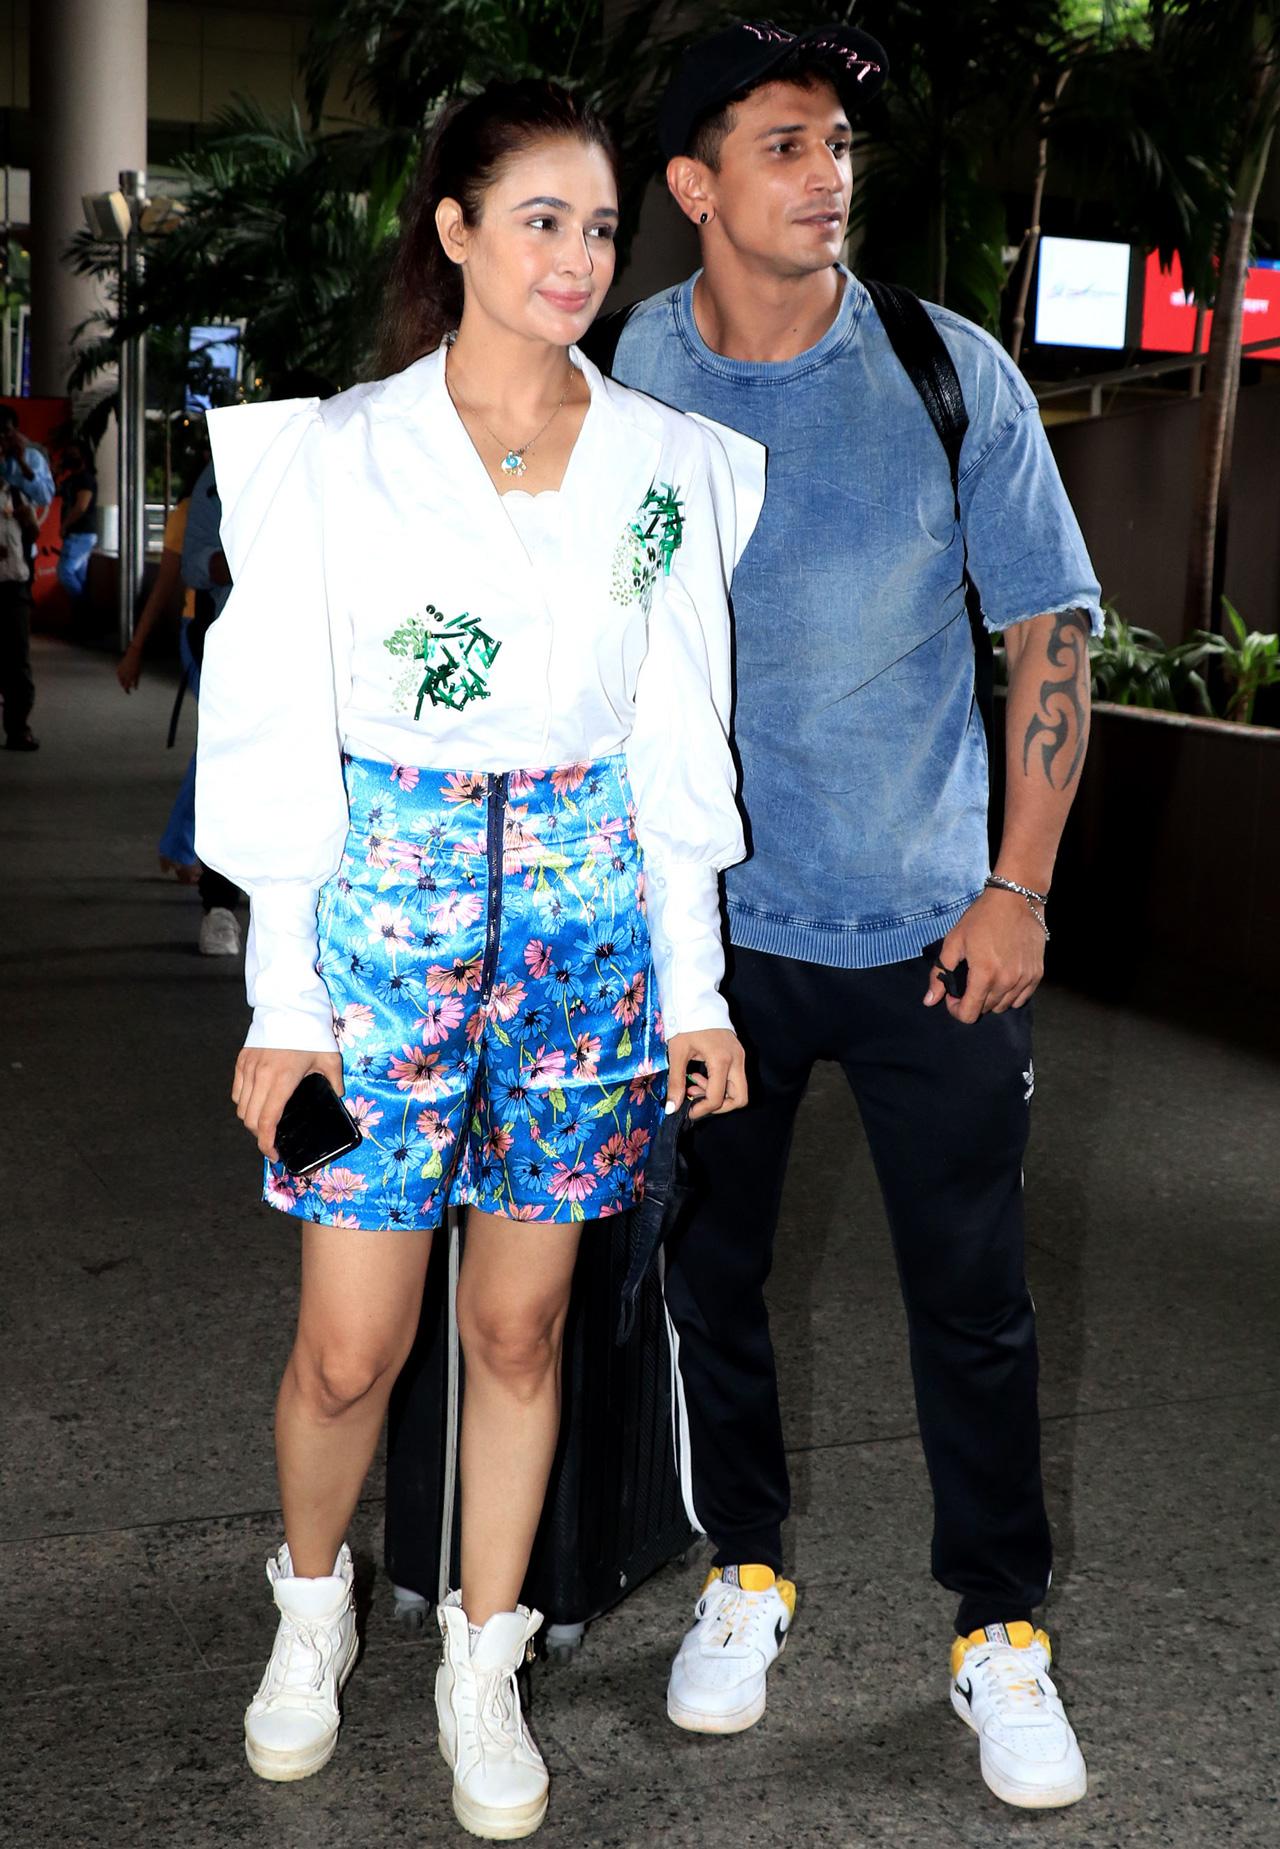 Telly couple Prince Narula and Yuvika Chaudhary were also spotted at the Mumbai airport.